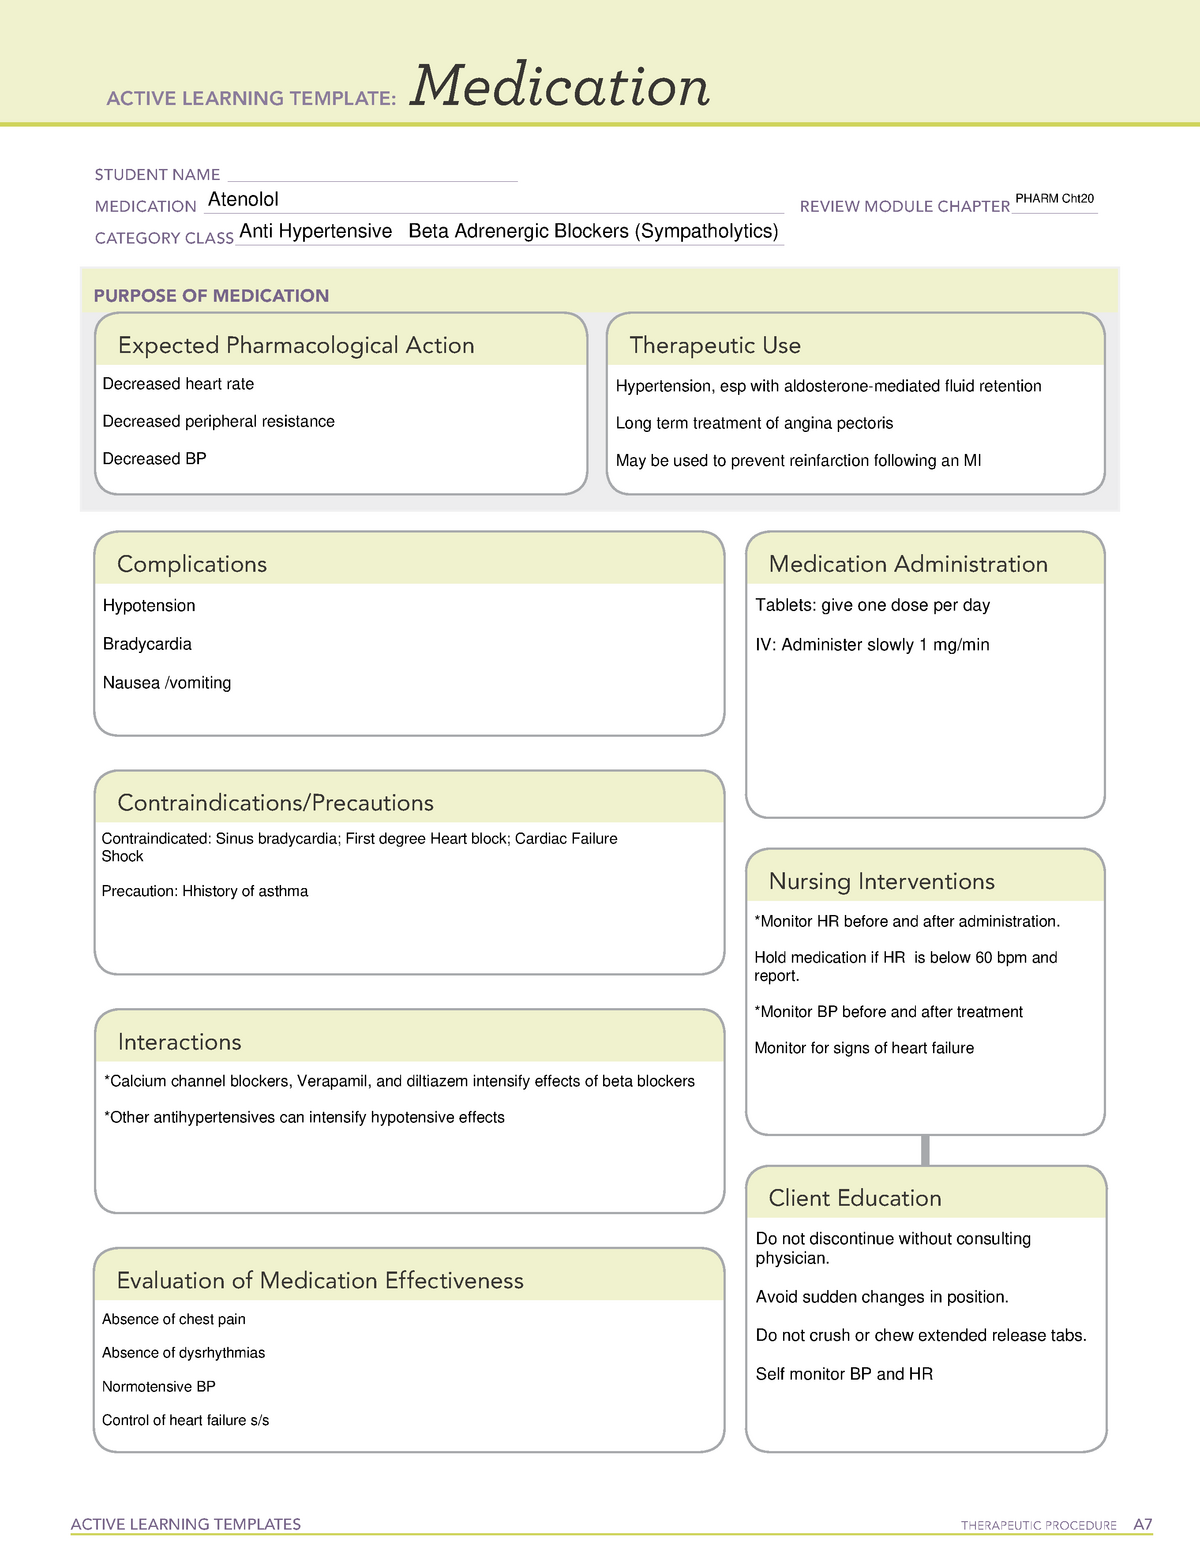 Active Learning Template Medication Sample Only CC f302